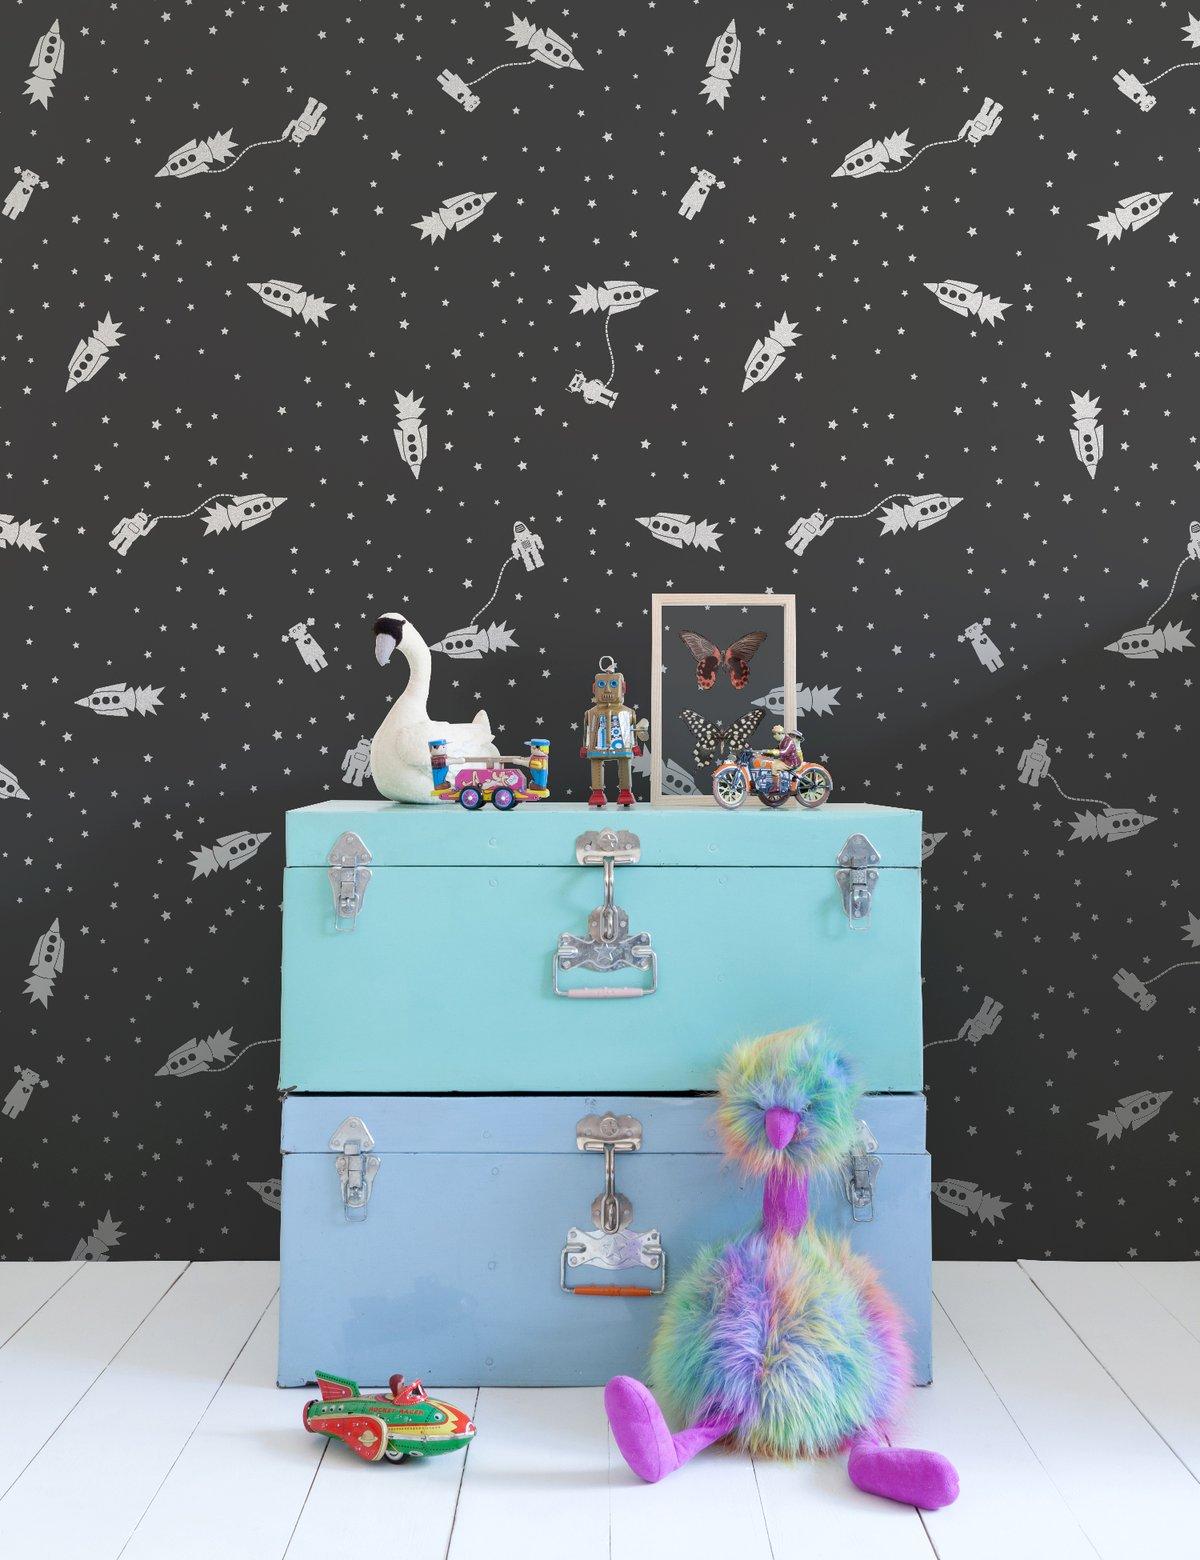 This wall-covering with a galactic scene has Robots in outer space, rocket ships & more... the perfect wallpaper for your child's room.

Samples are available for $18 including US shipping, please message us to purchase.

Printing: Screen-printed by